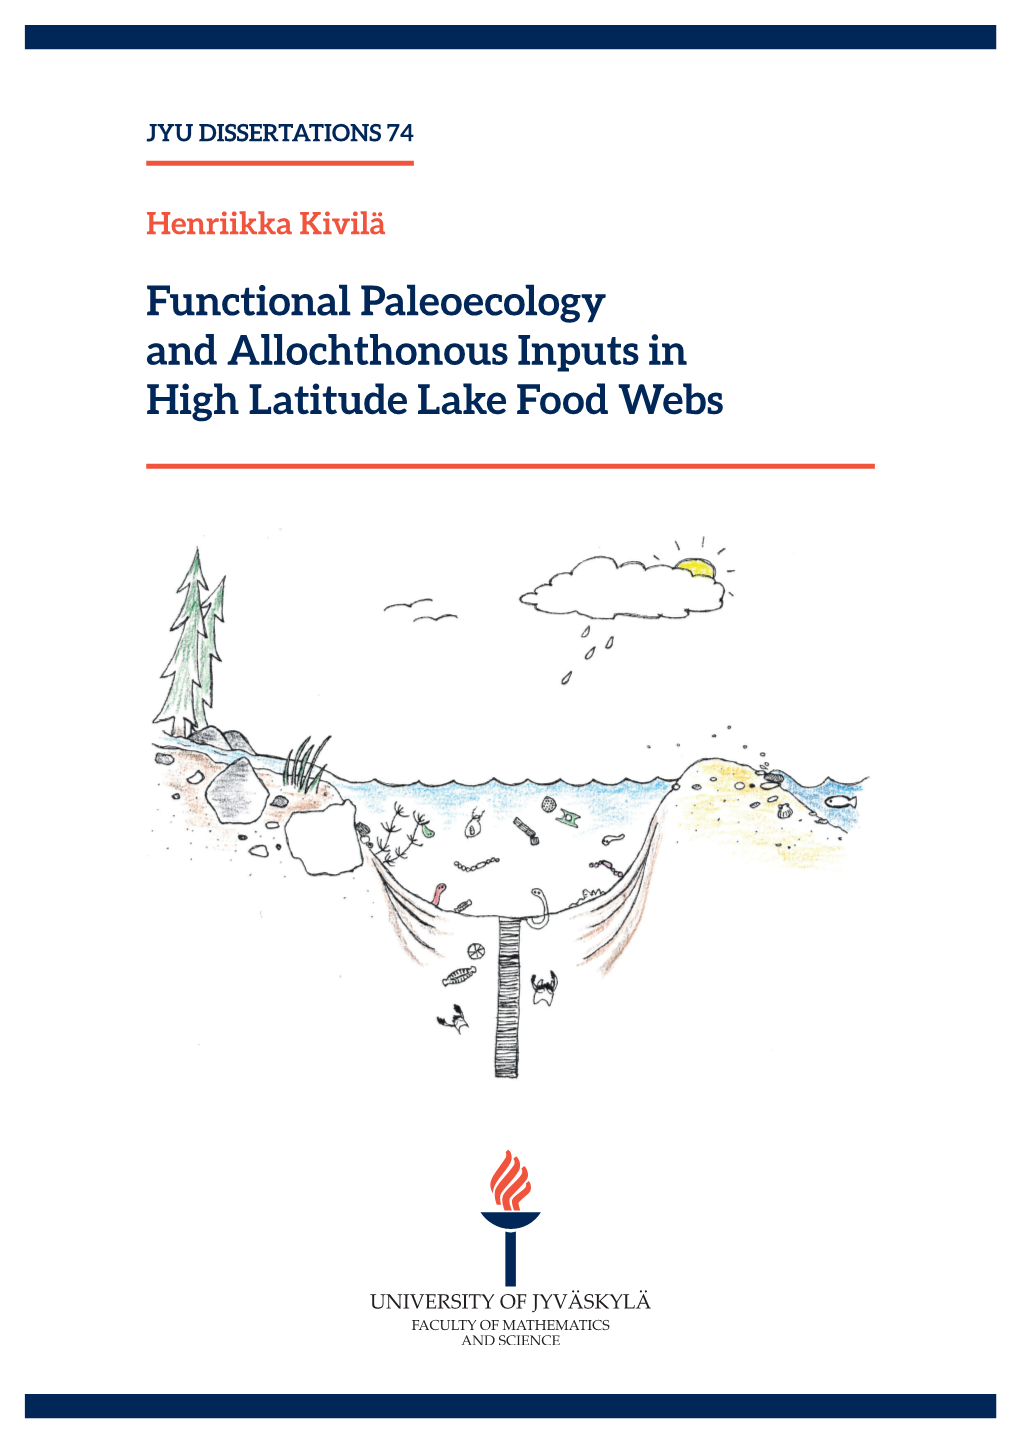 Functional Paleoecology and Allochthonous Inputs in High Latitude Lake Food Webs JYU DISSERTATIONS 74